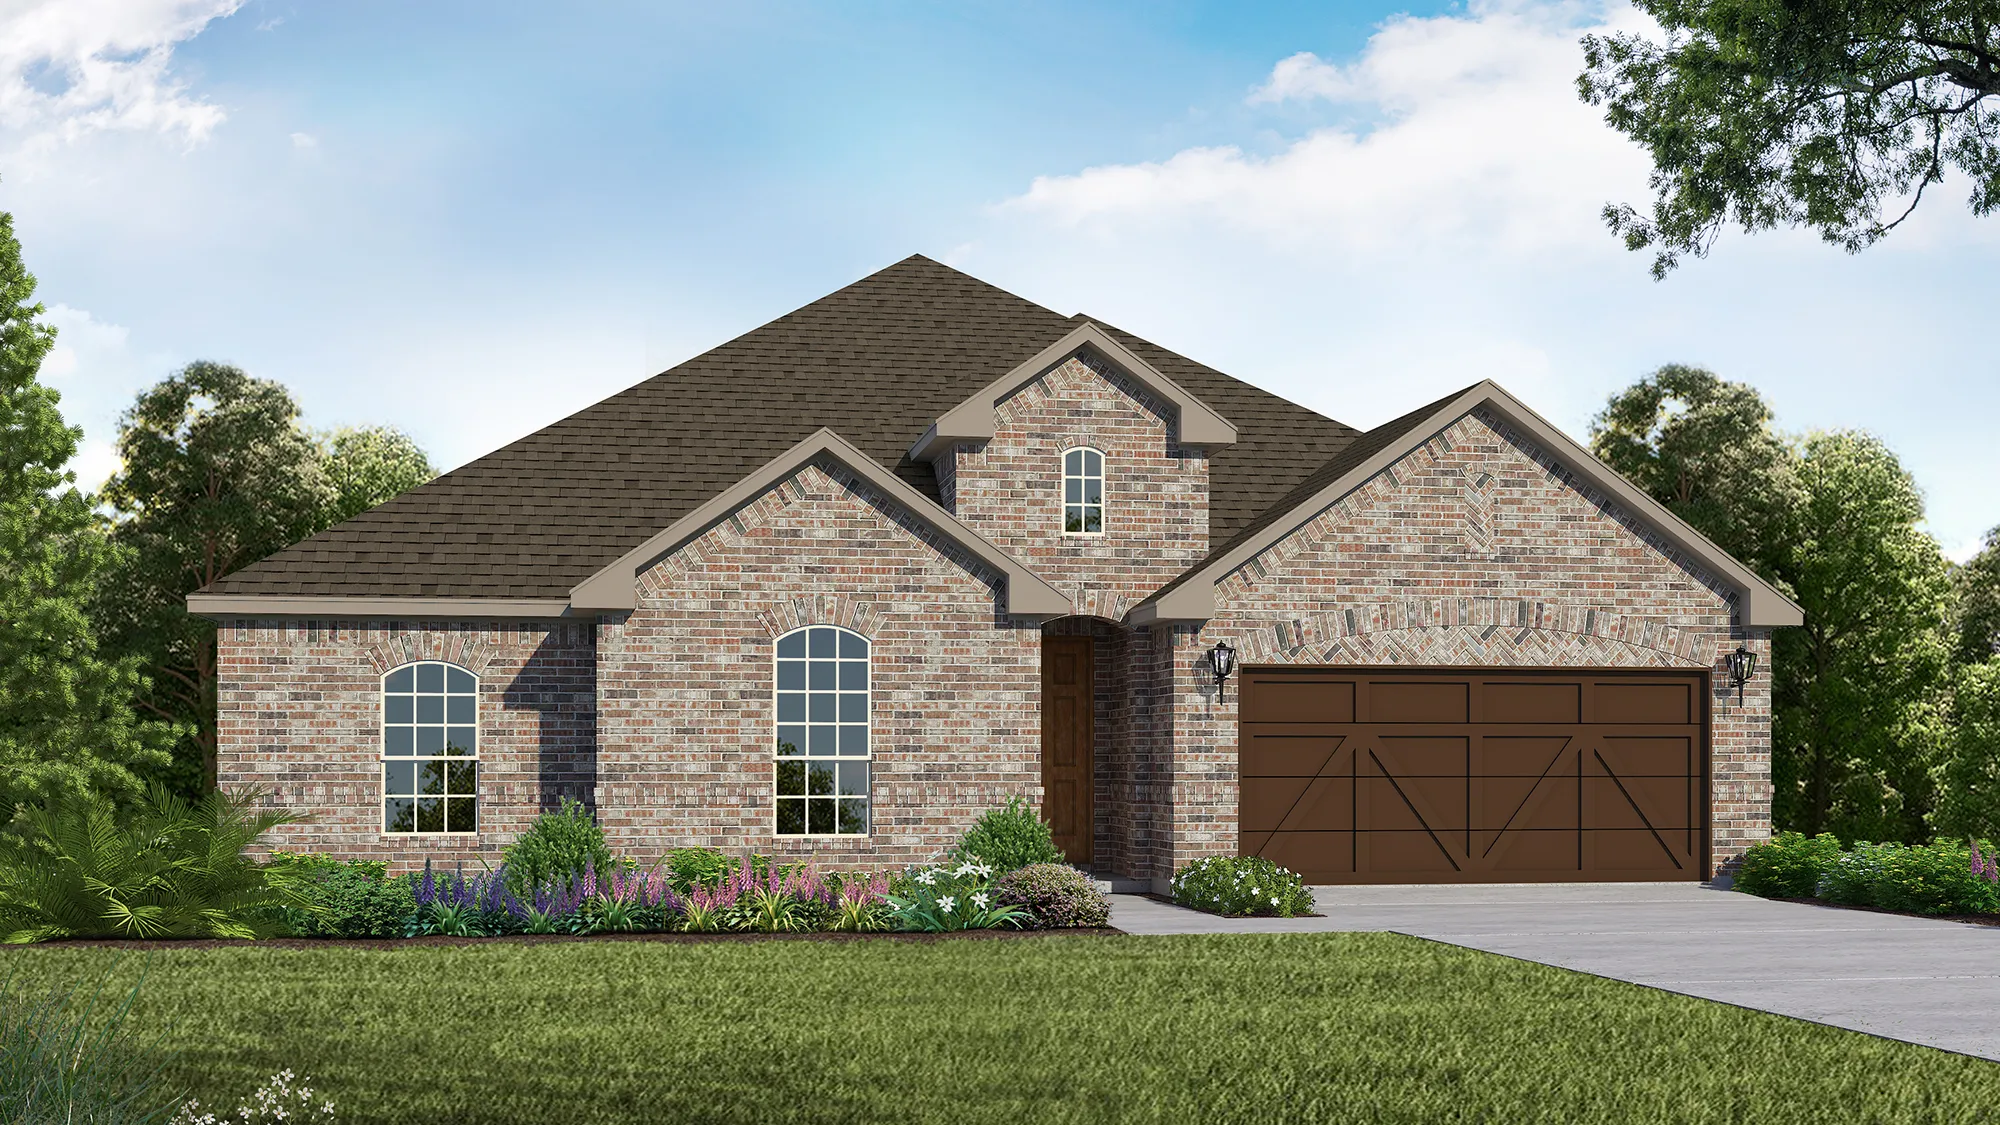 Plan 1681 Elevation A by American Legend Homes